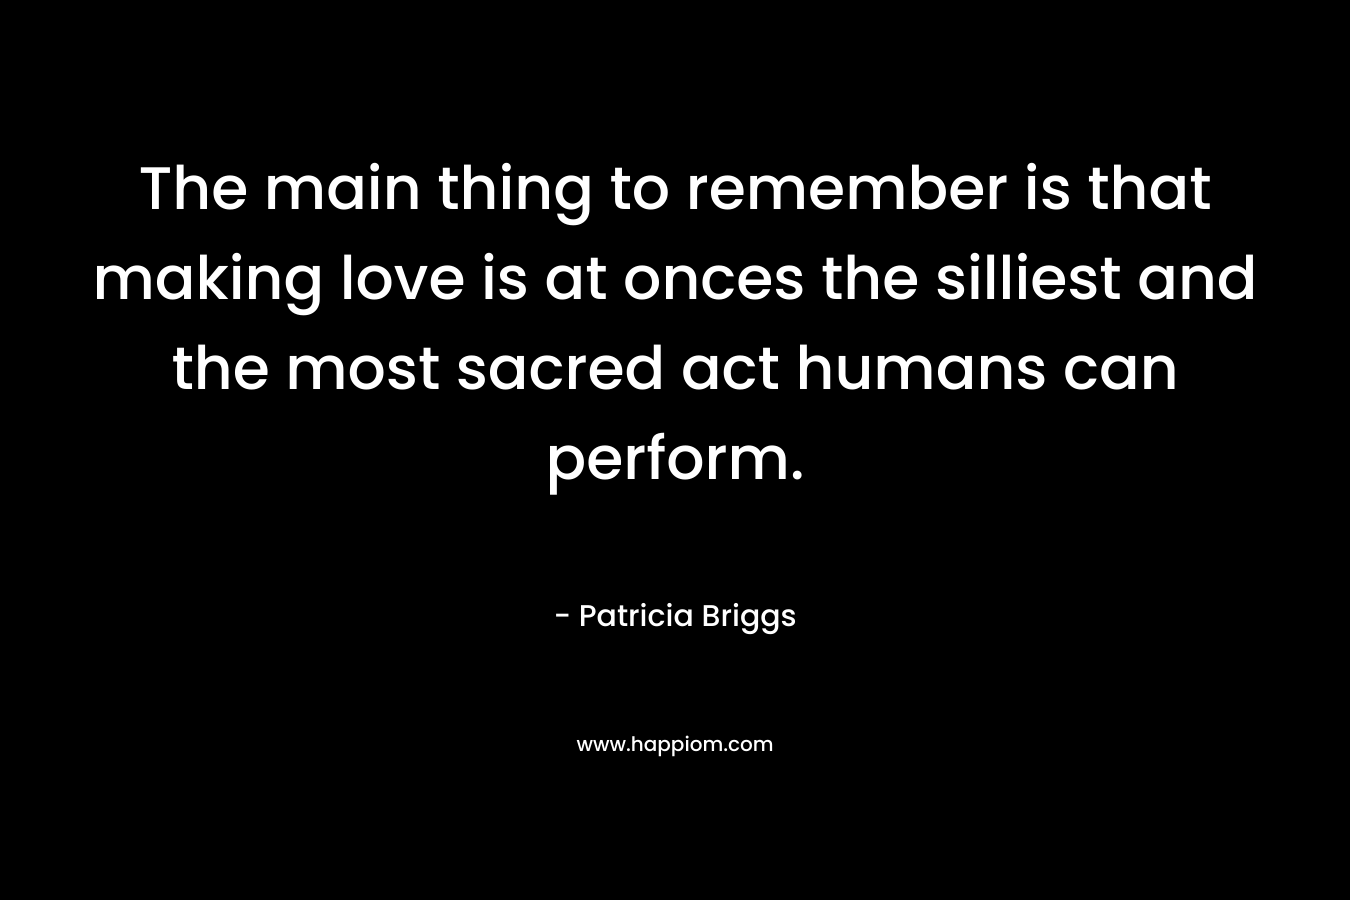 The main thing to remember is that making love is at onces the silliest and the most sacred act humans can perform. – Patricia Briggs